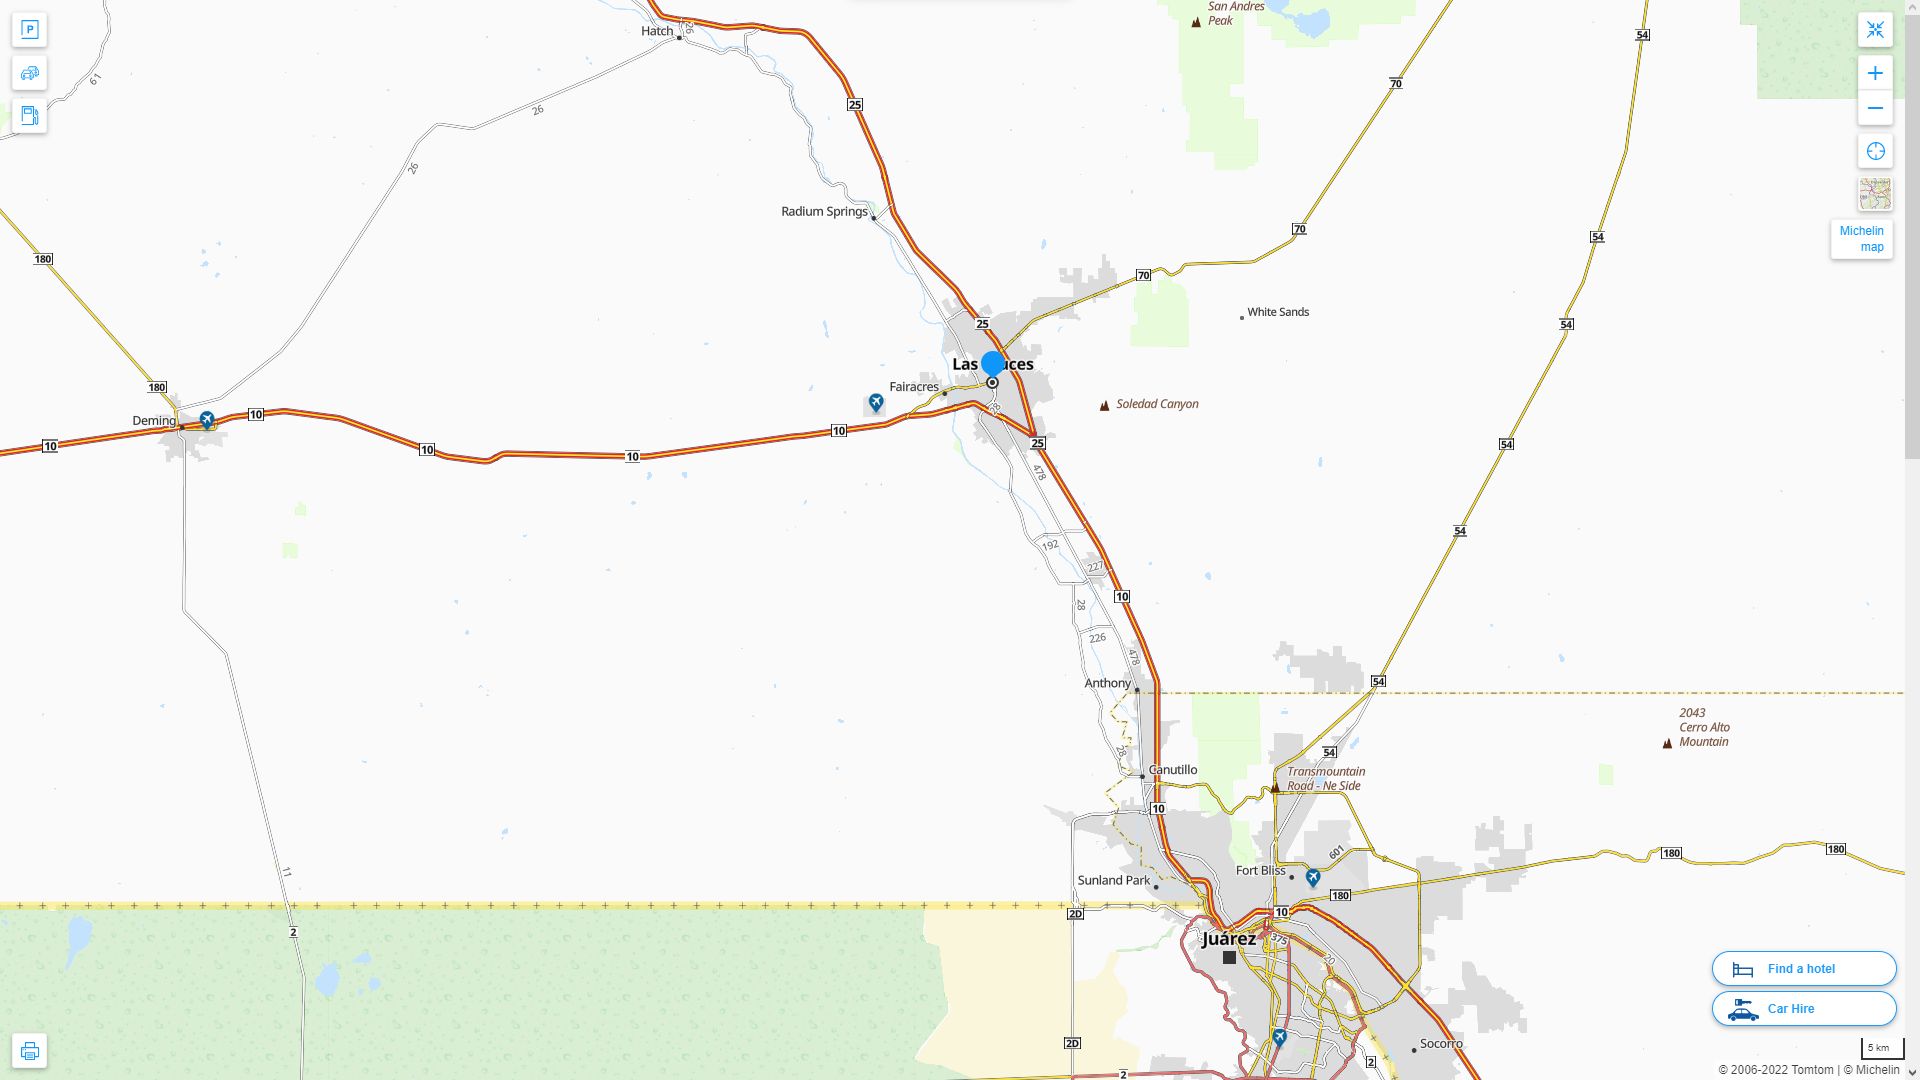 Las Cruces New Mexico Highway and Road Map